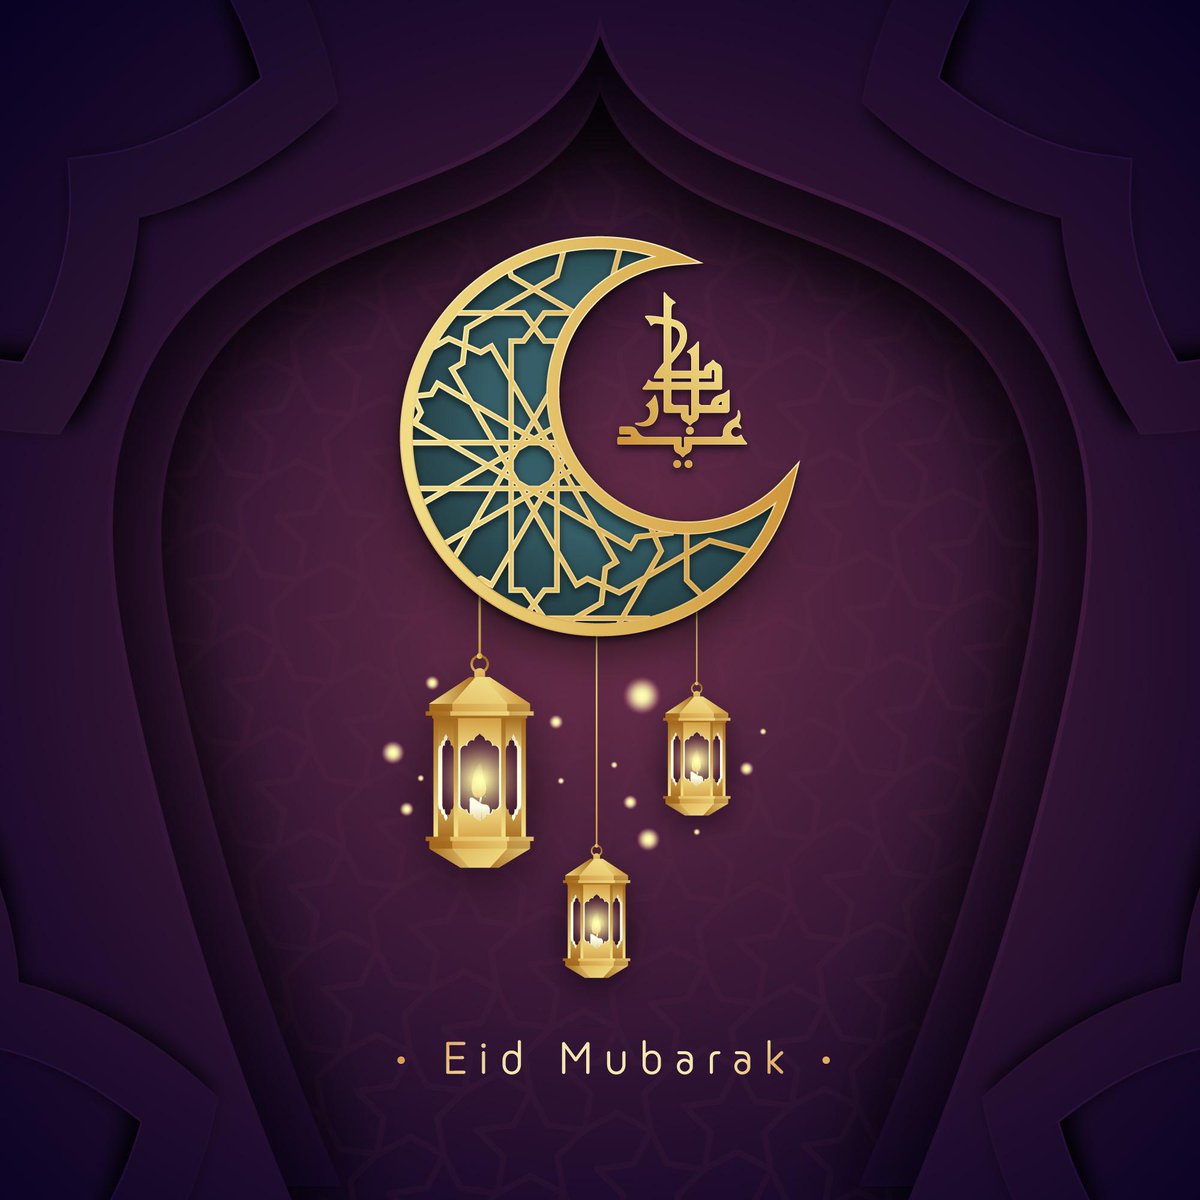 Eid Mubarak from all at NNECL. May this Eid ul-Fitr bring you and your loved ones joy, peace and prosperity. #EidMubarak